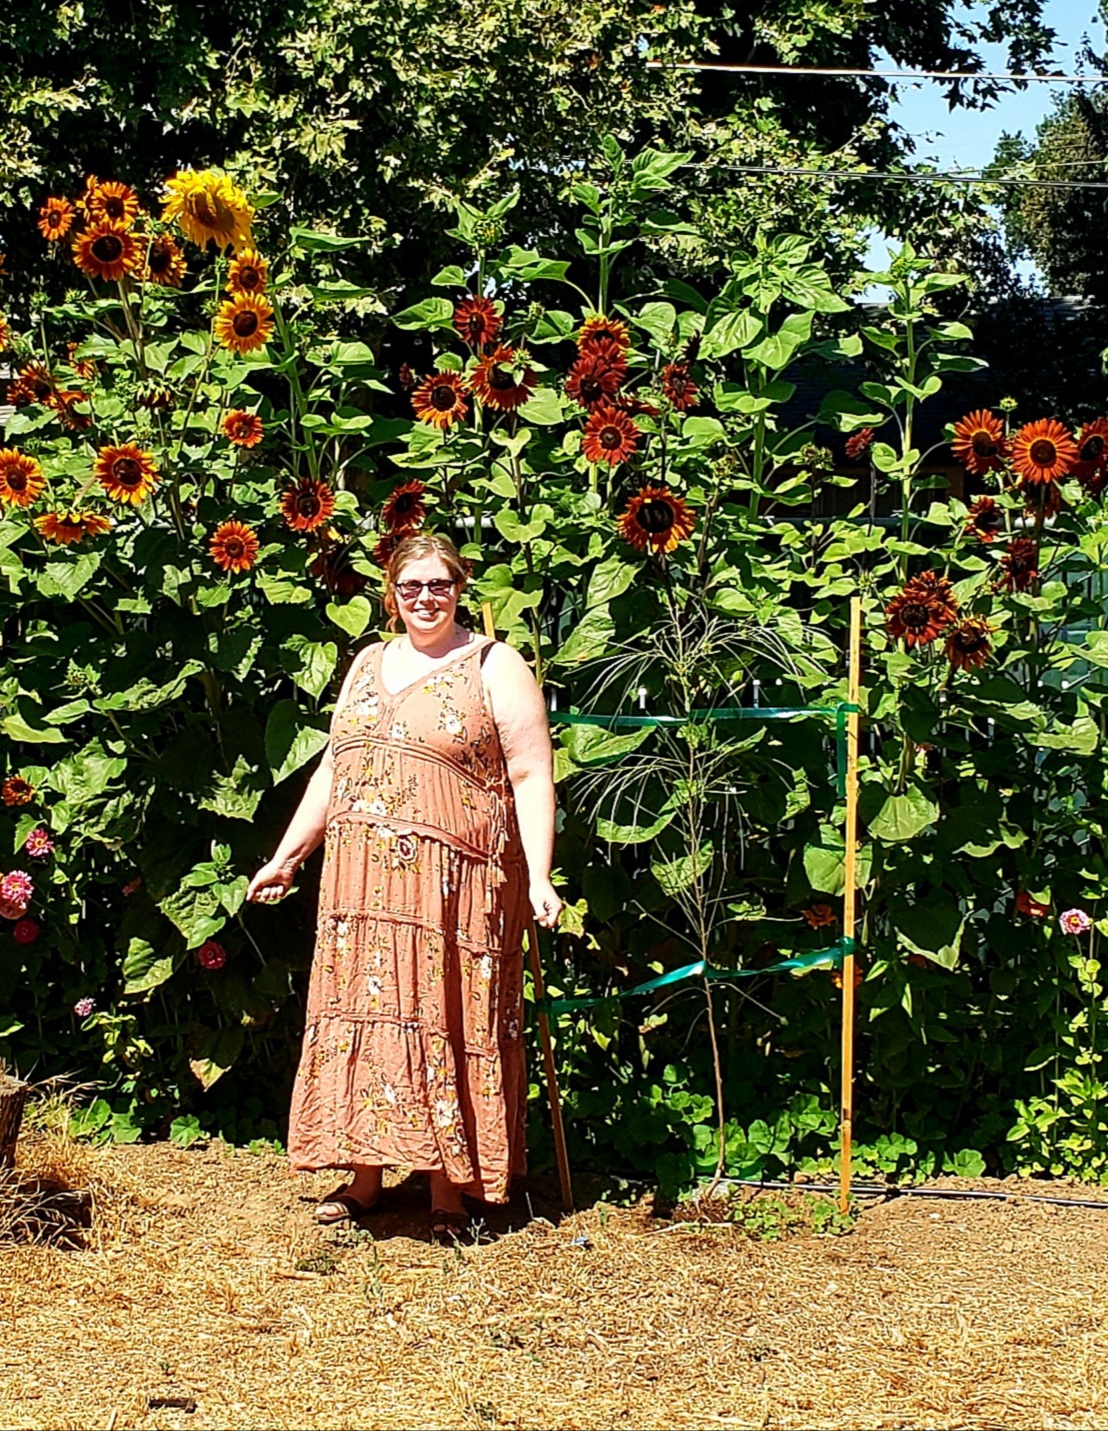 Christine standing in front of a group of sunflowers